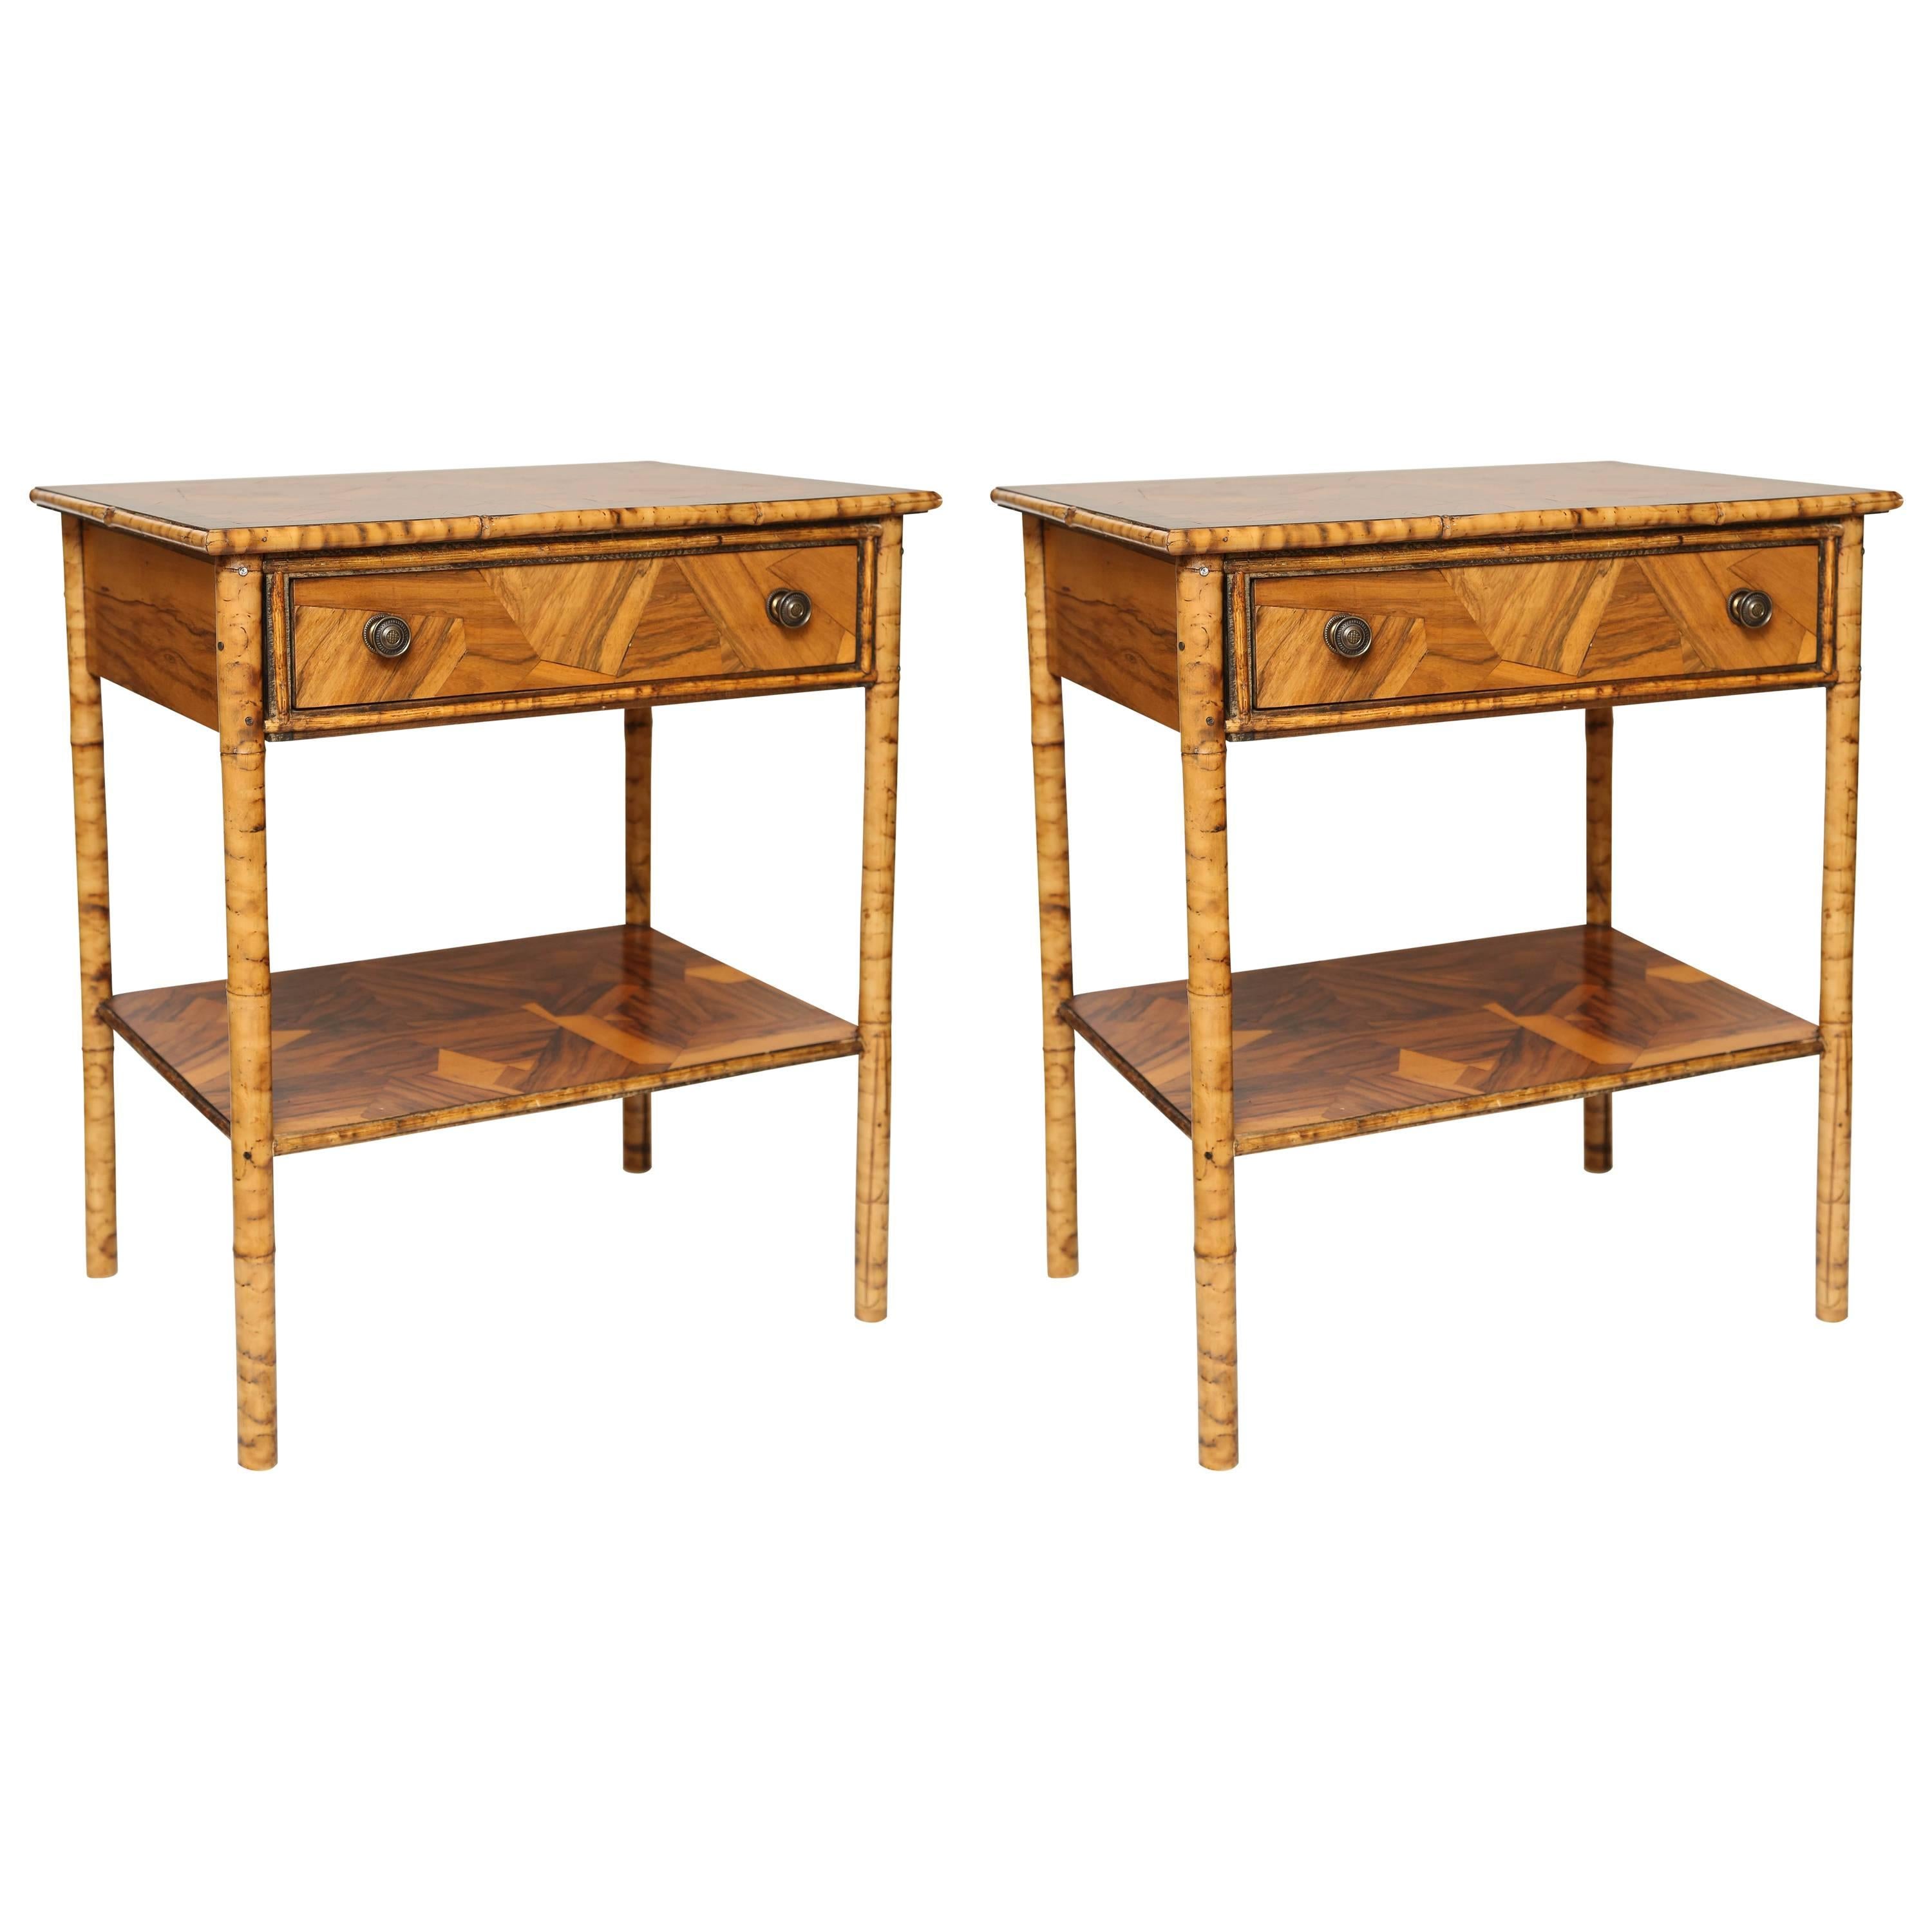 Pair of Antique Bamboo Side Table